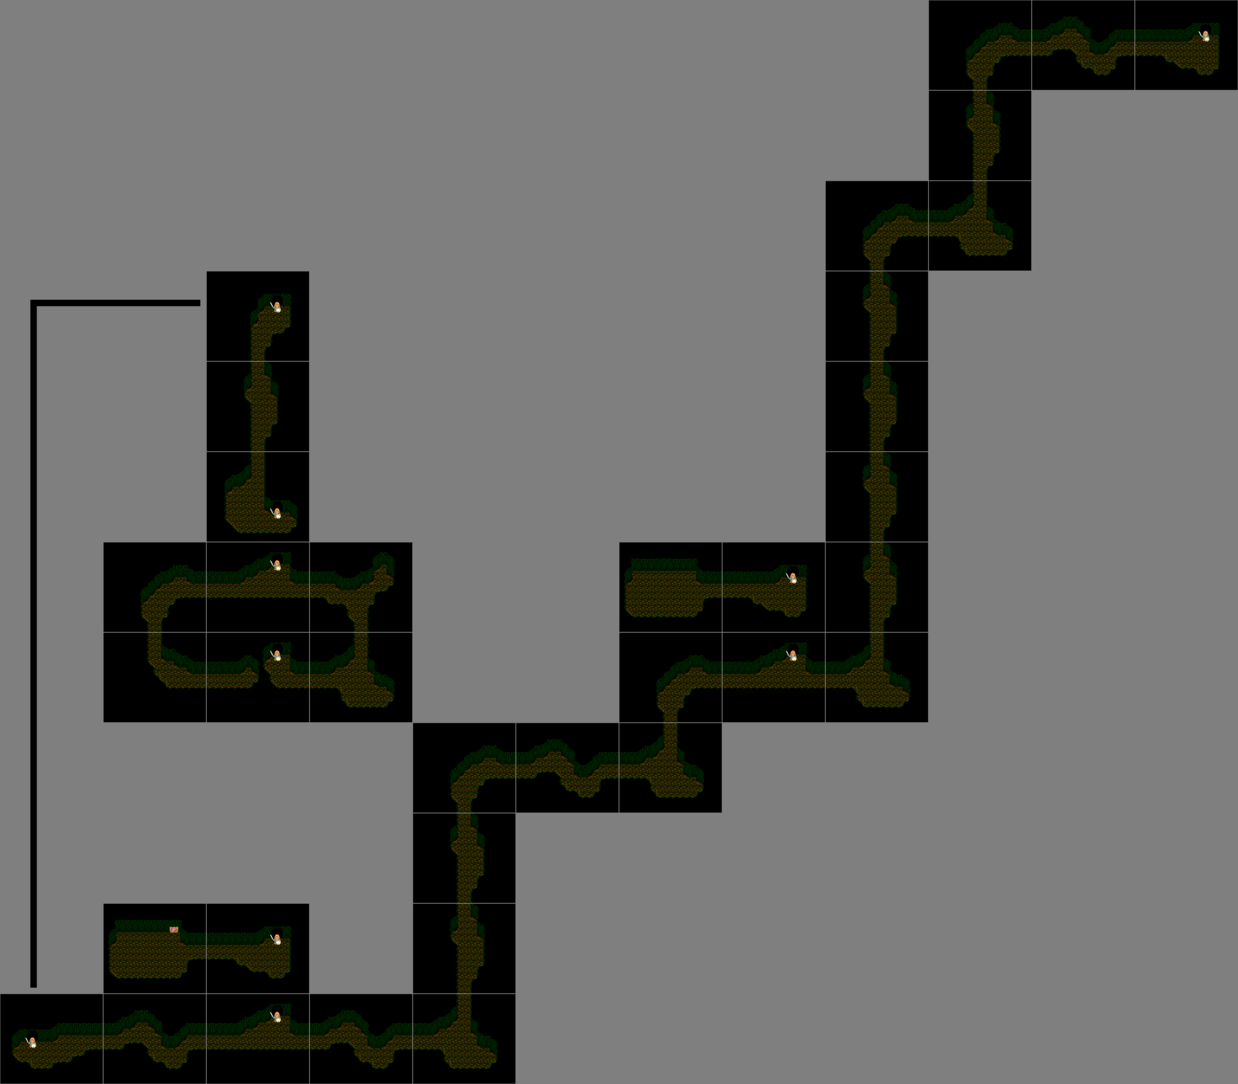 willow-nes-nockmaar-strategywiki-the-video-game-walkthrough-and-strategy-guide-wiki